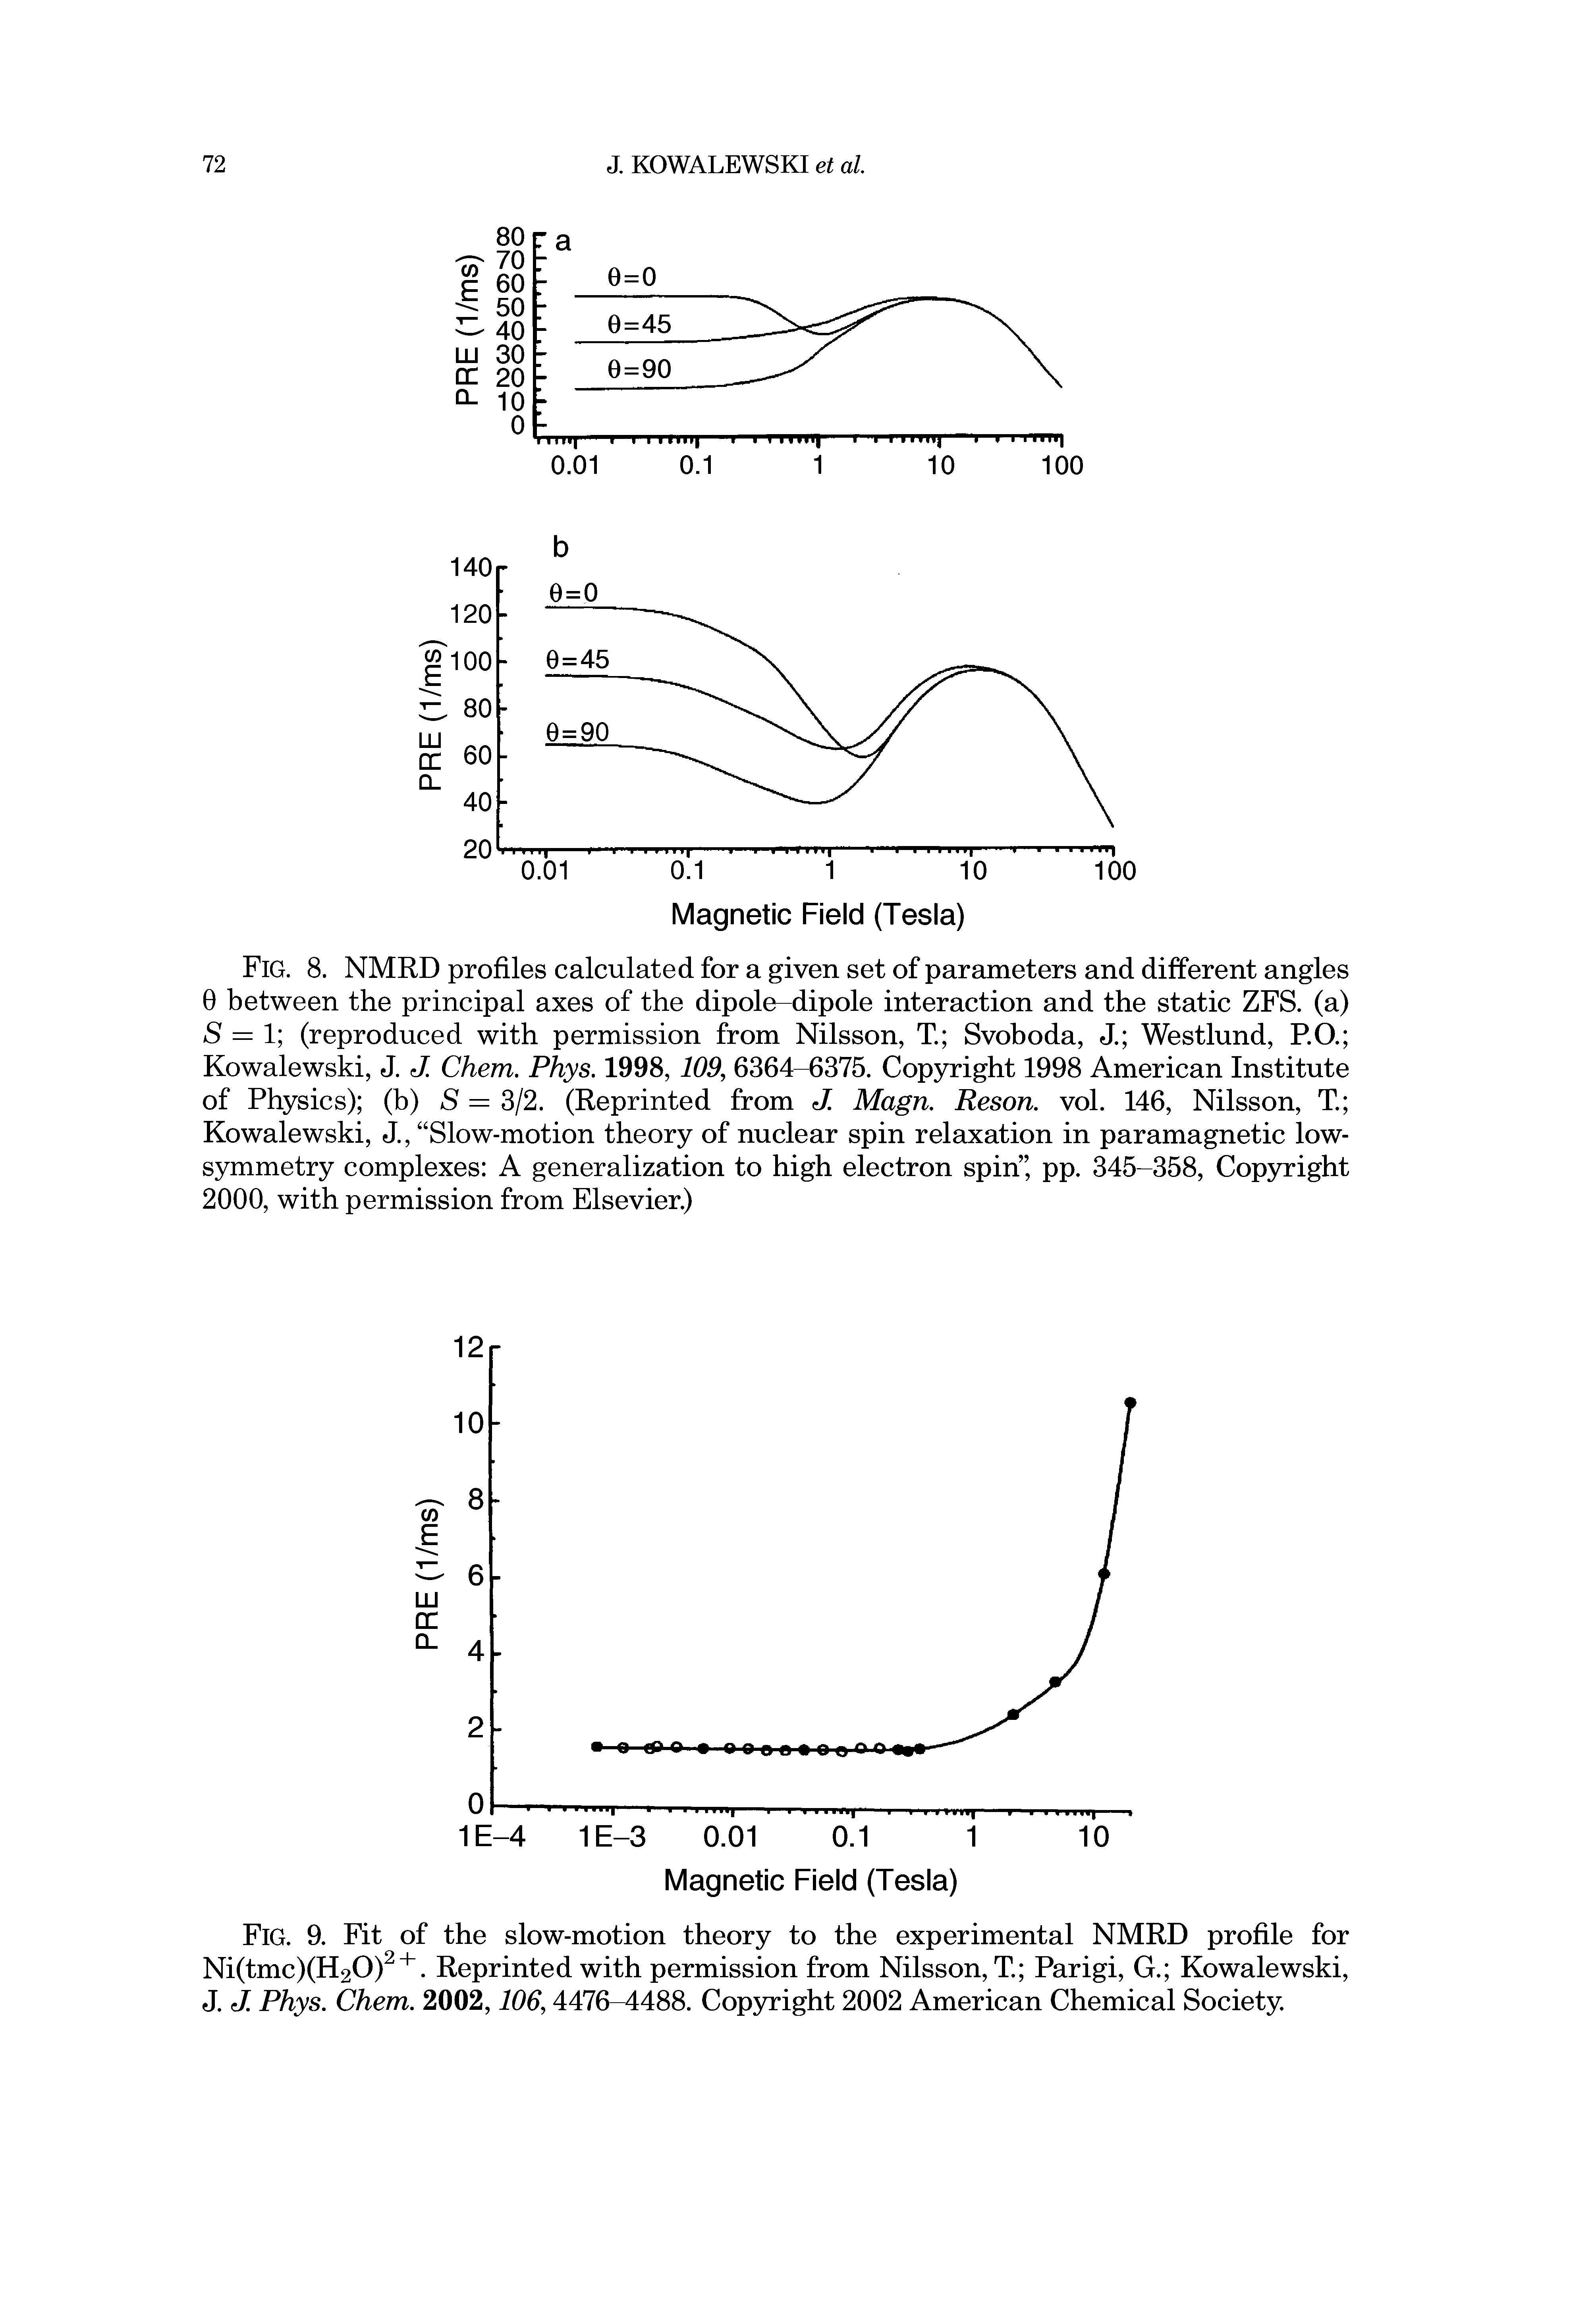 Fig. 8. NMRD profiles calculated for a given set of parameters and different angles 0 between the principal axes of the dipole-dipole interaction and the static ZFS. (a) S = 1 (reproduced with permission from Nilsson, T Svoboda, J. Westlund, P.O. Kowalewski, J. J. Chem. Phys. 1998, 109, 6364-6375. Copyright 1998 American Institute of Physics) (b) S = 3/2. (Reprinted from J. Magn. Reson. vol. 146, Nilsson, T Kowalewski, J., Slow-motion theory of nuclear spin relaxation in paramagnetic low-symmetry complexes A generalization to high electron spin , pp. 345-358, Copyright 2000, with permission from Elsevier.)...